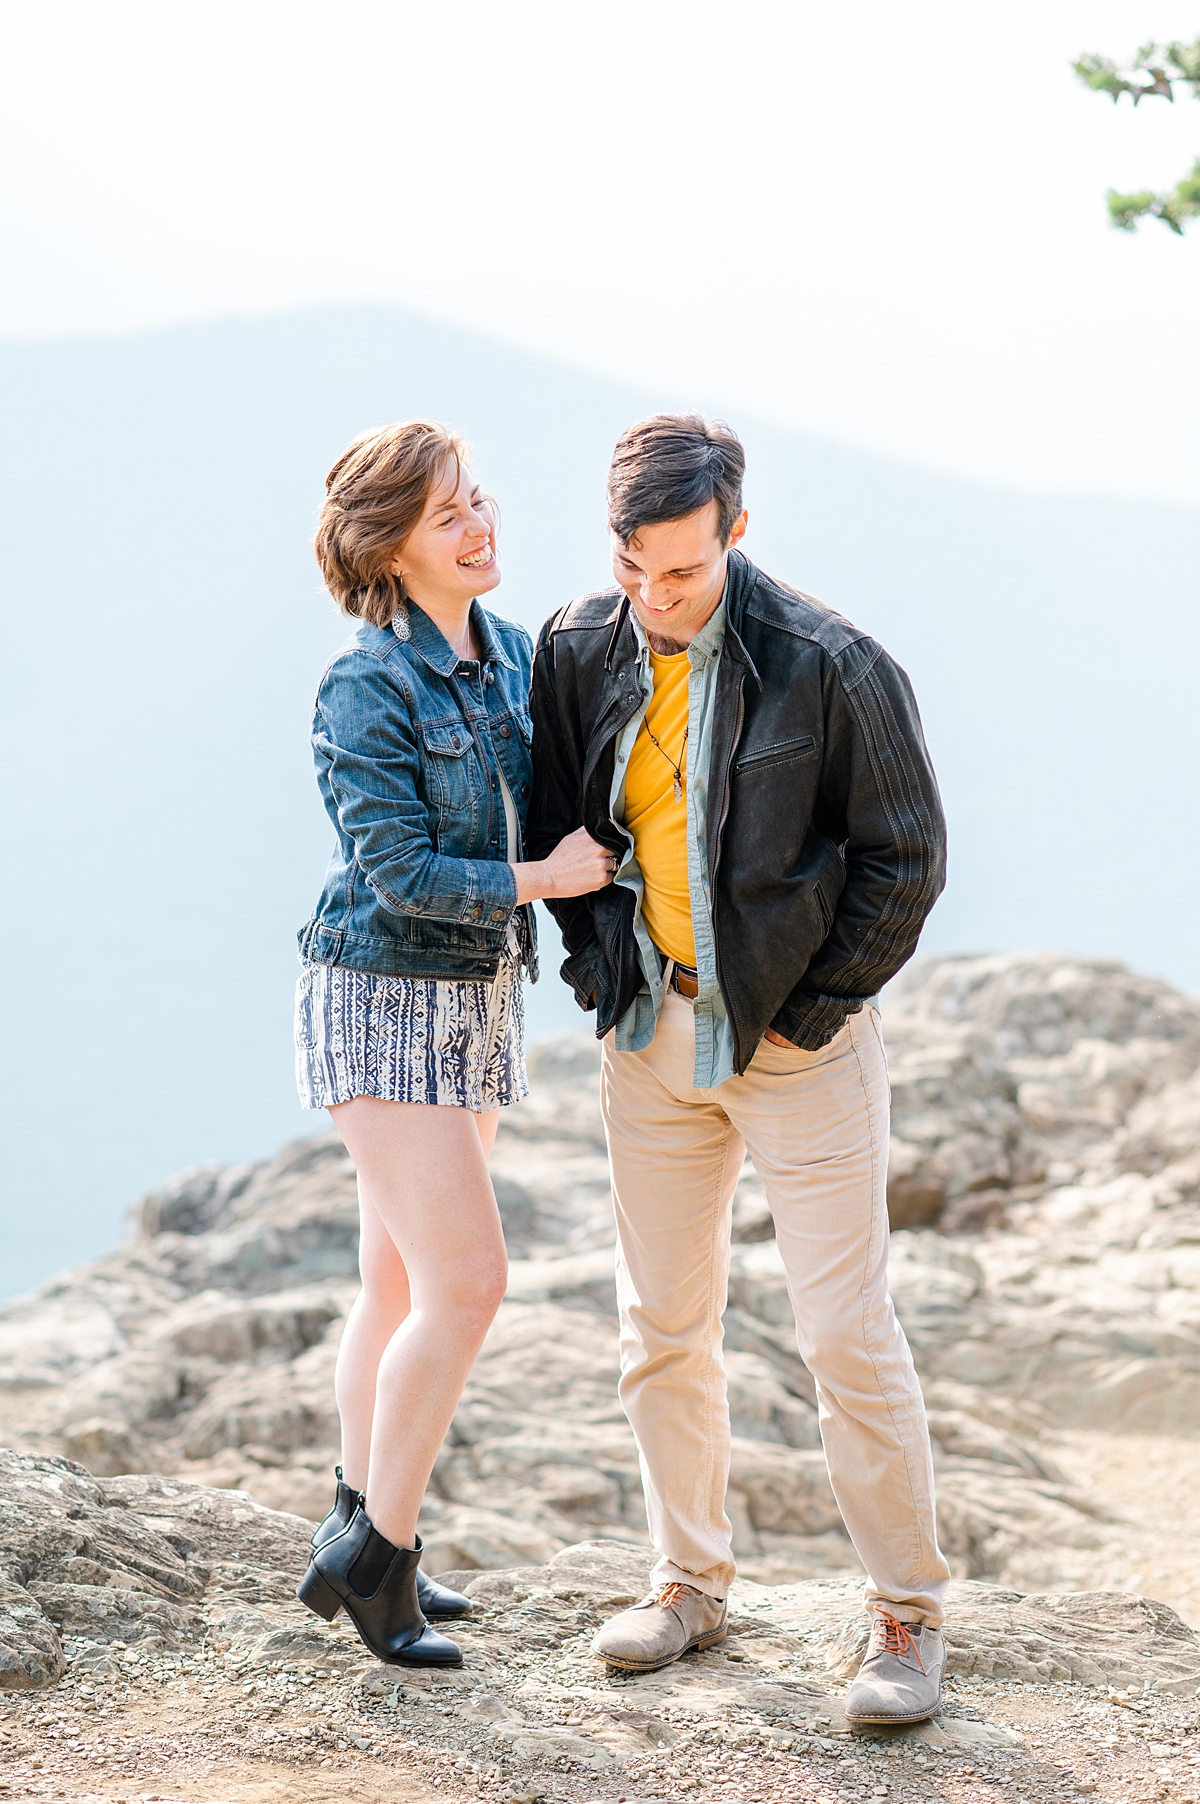 A Fun Raven's Roost Overlook Engagement Session with Mountain Views and Hiking Style Outfits. 